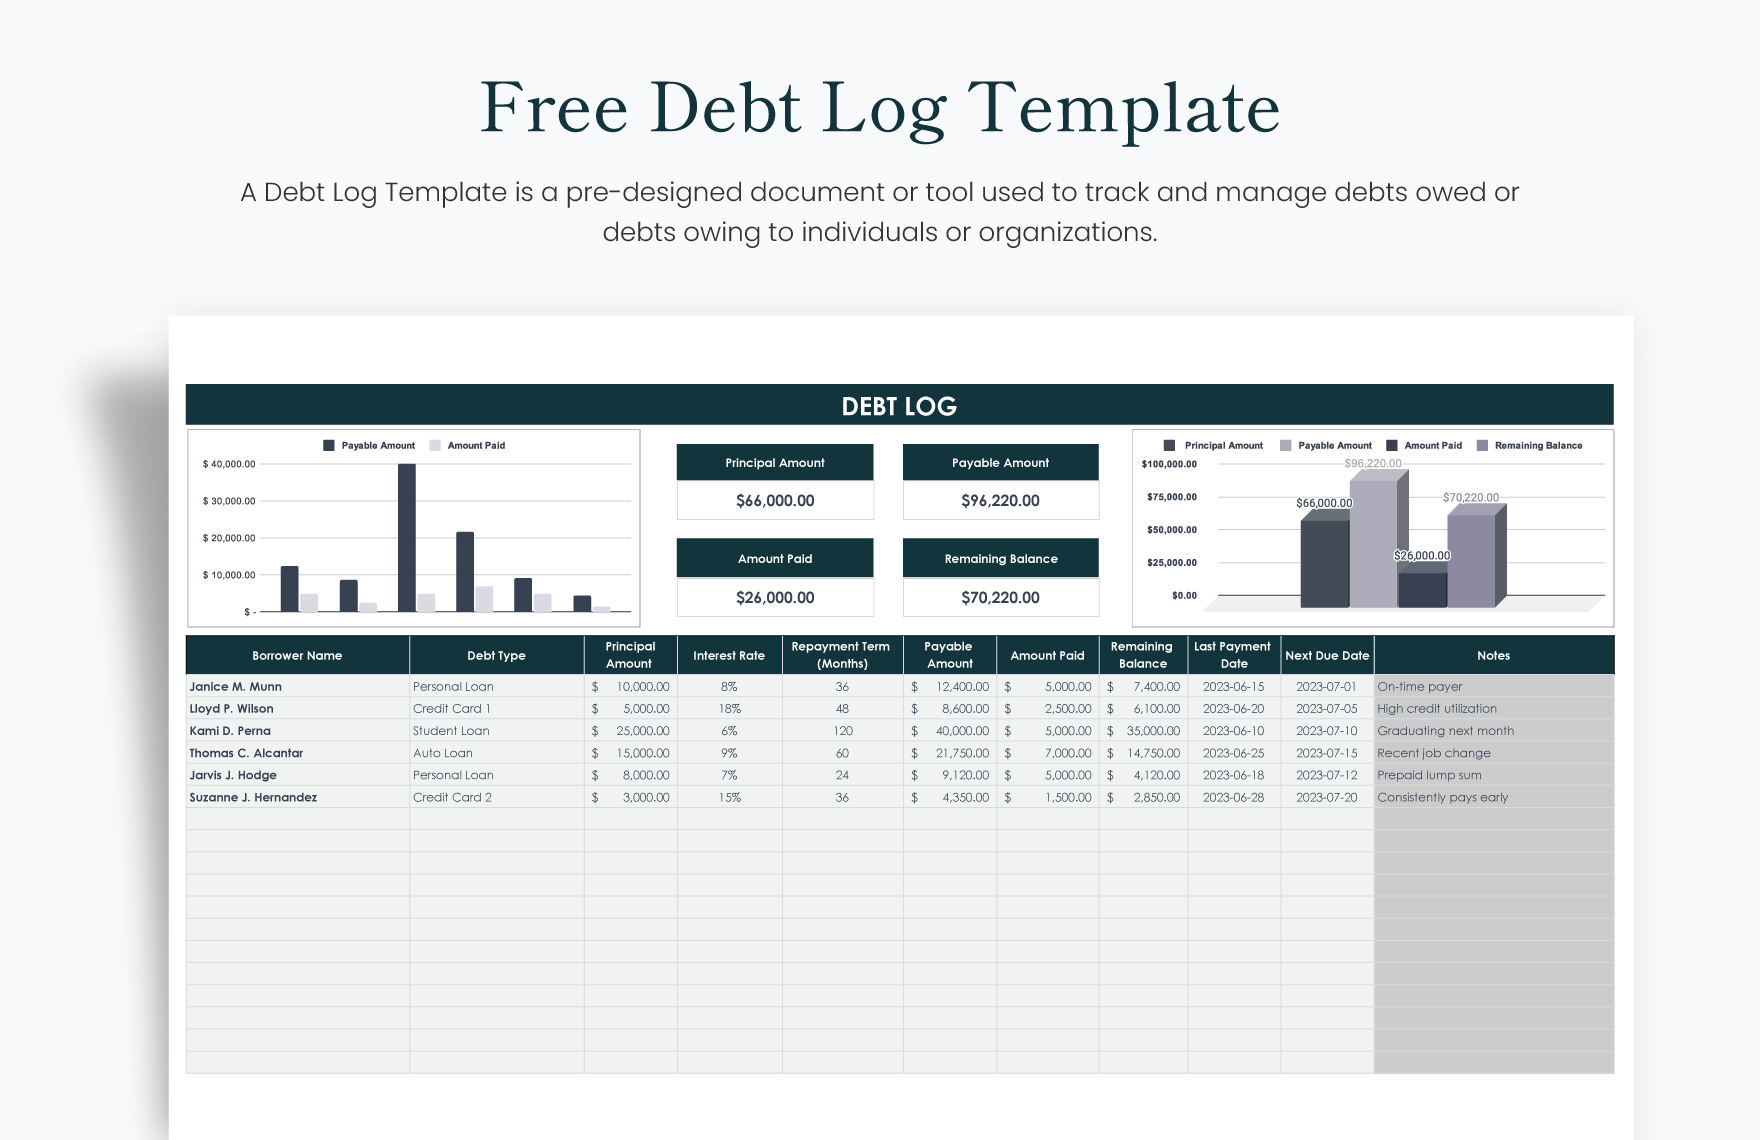 Free Debt Log Template in Excel, Google Sheets